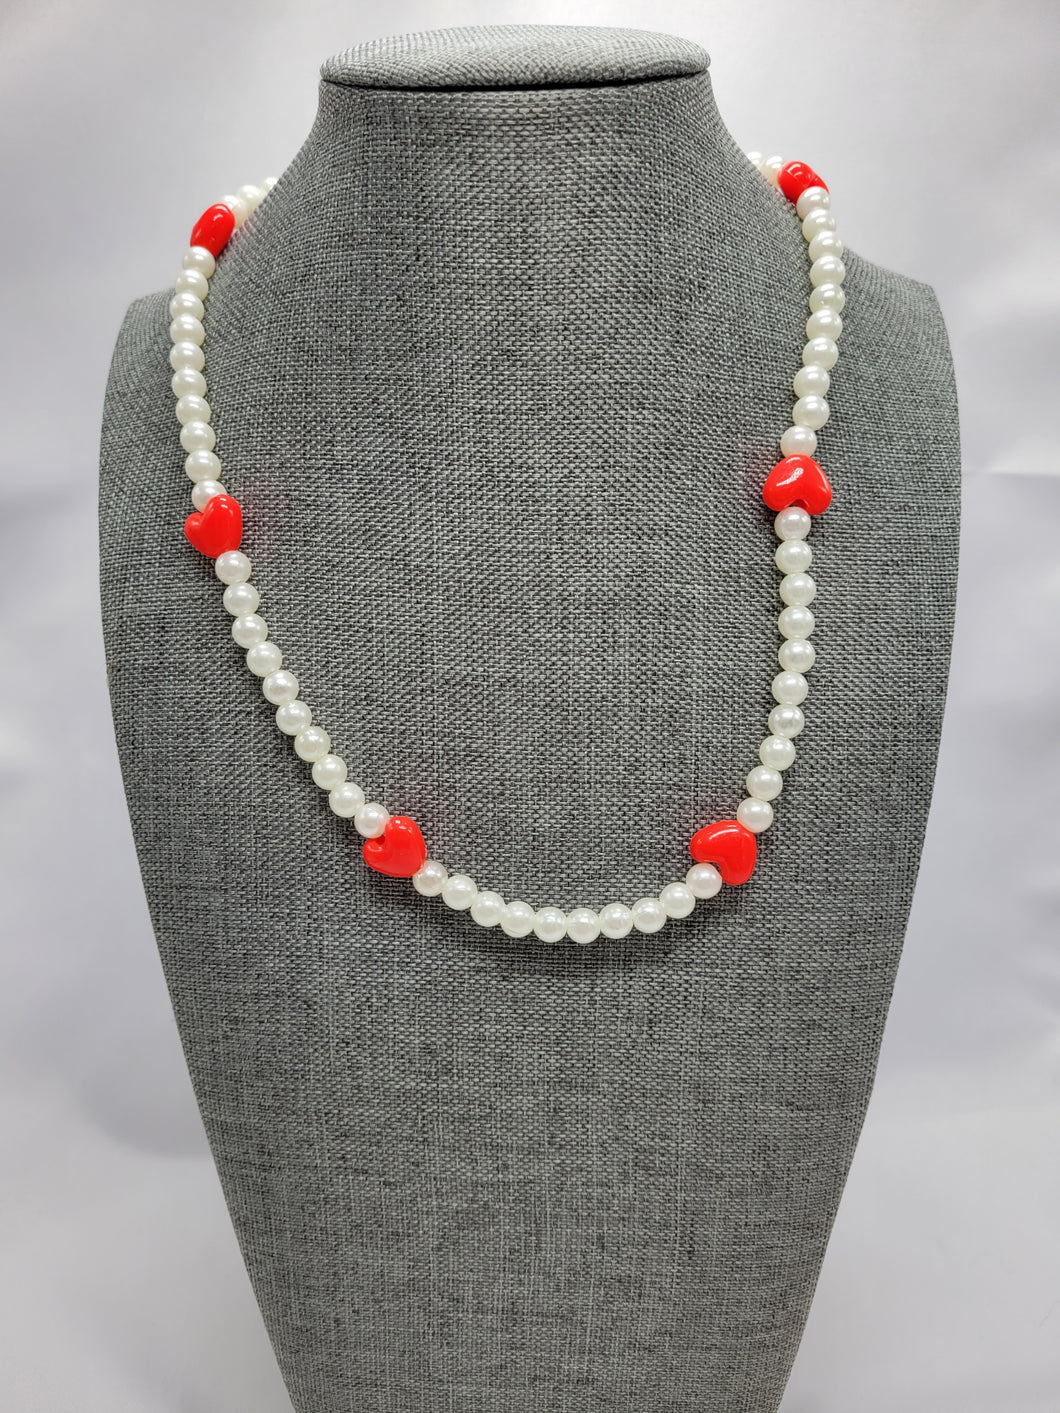 Lady in Red Heart Necklace